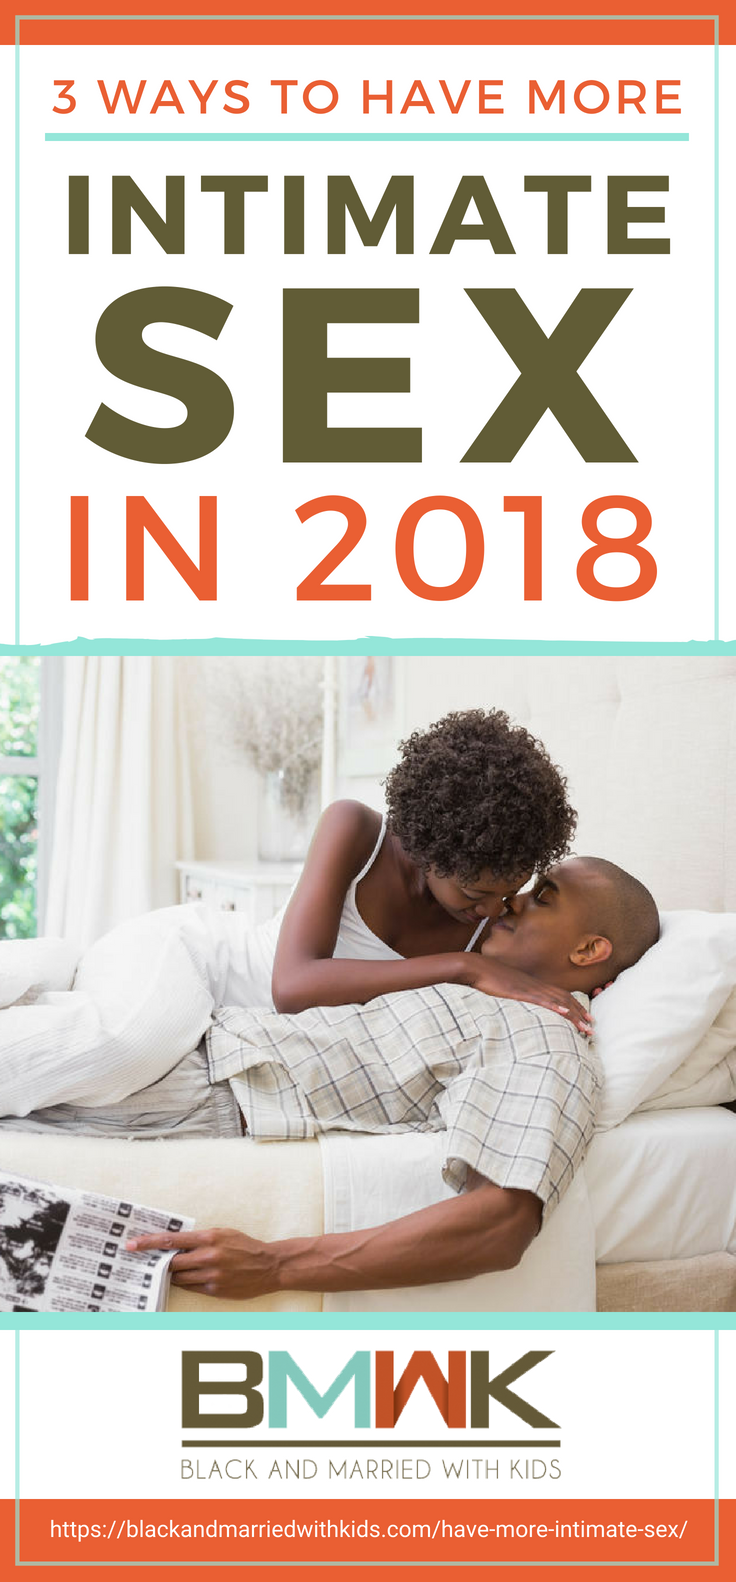 Pinterest Placard | 3 Ways to Have More Intimate Sex in 2018 | long-term relationship